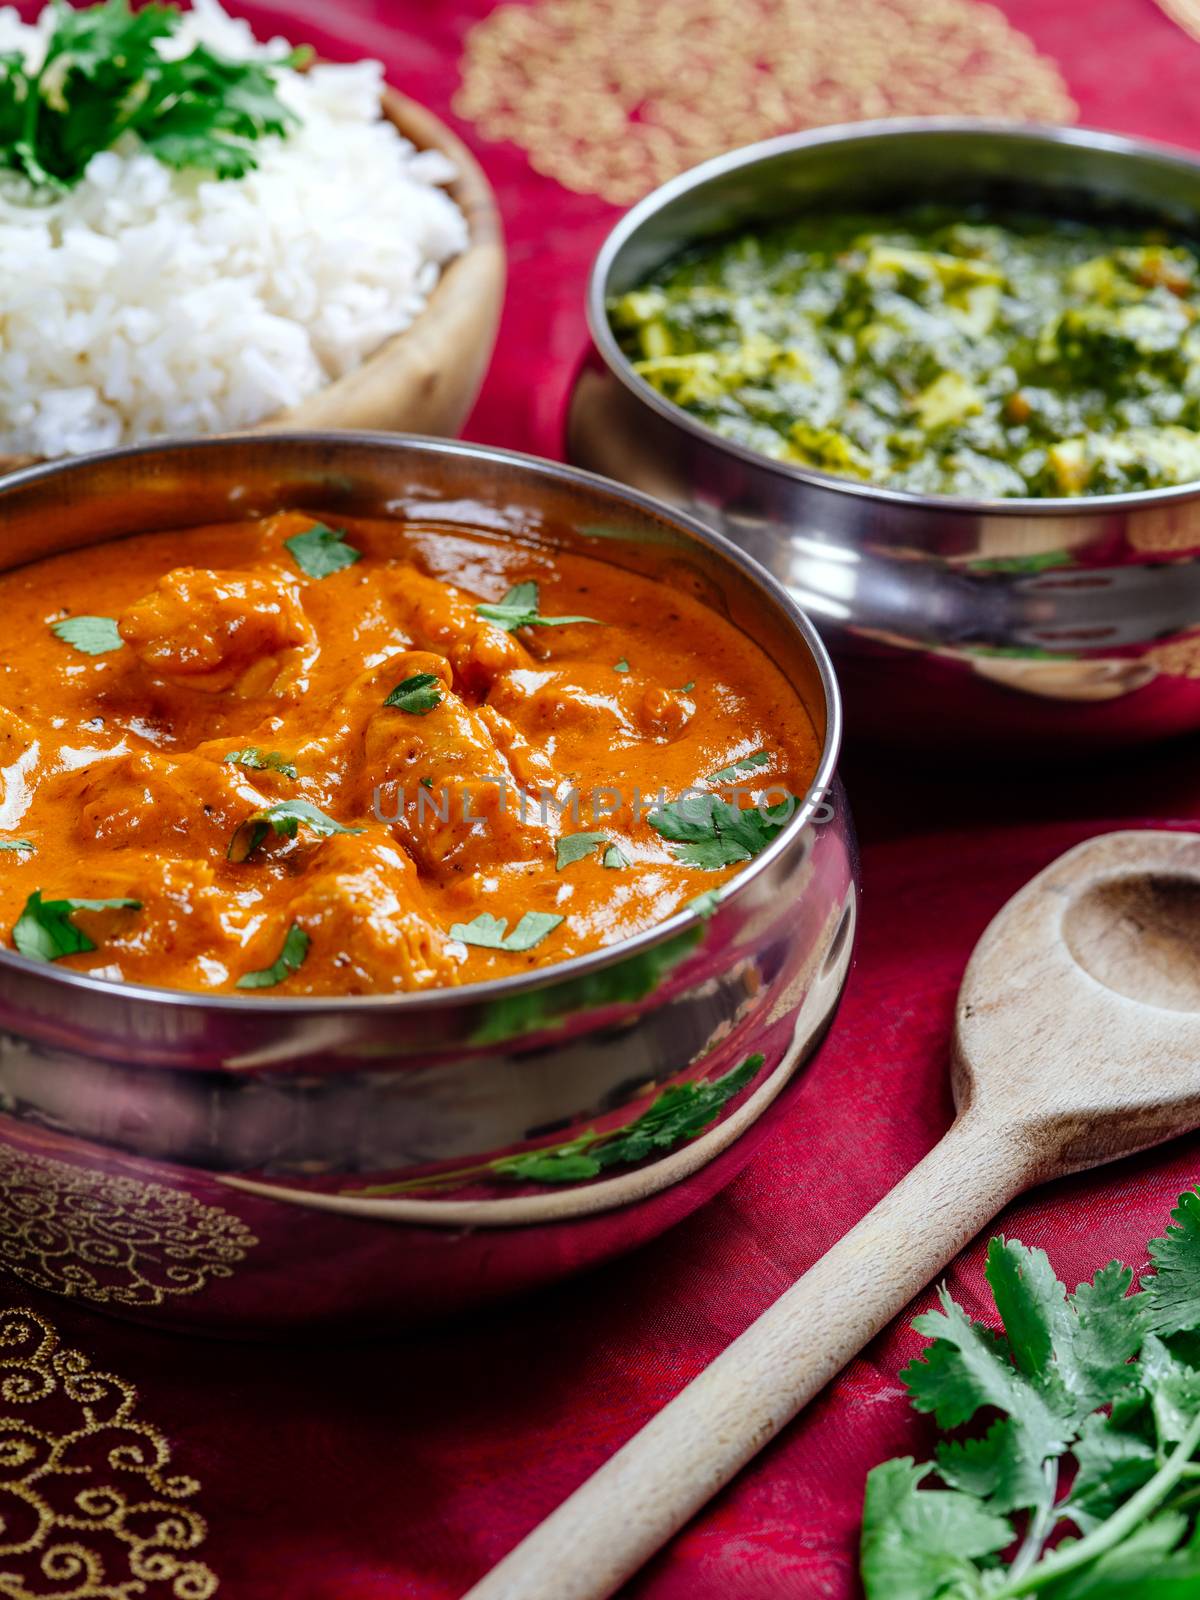 Photo of an Indian meal of Butter Chicken, rice and Saag Paneer